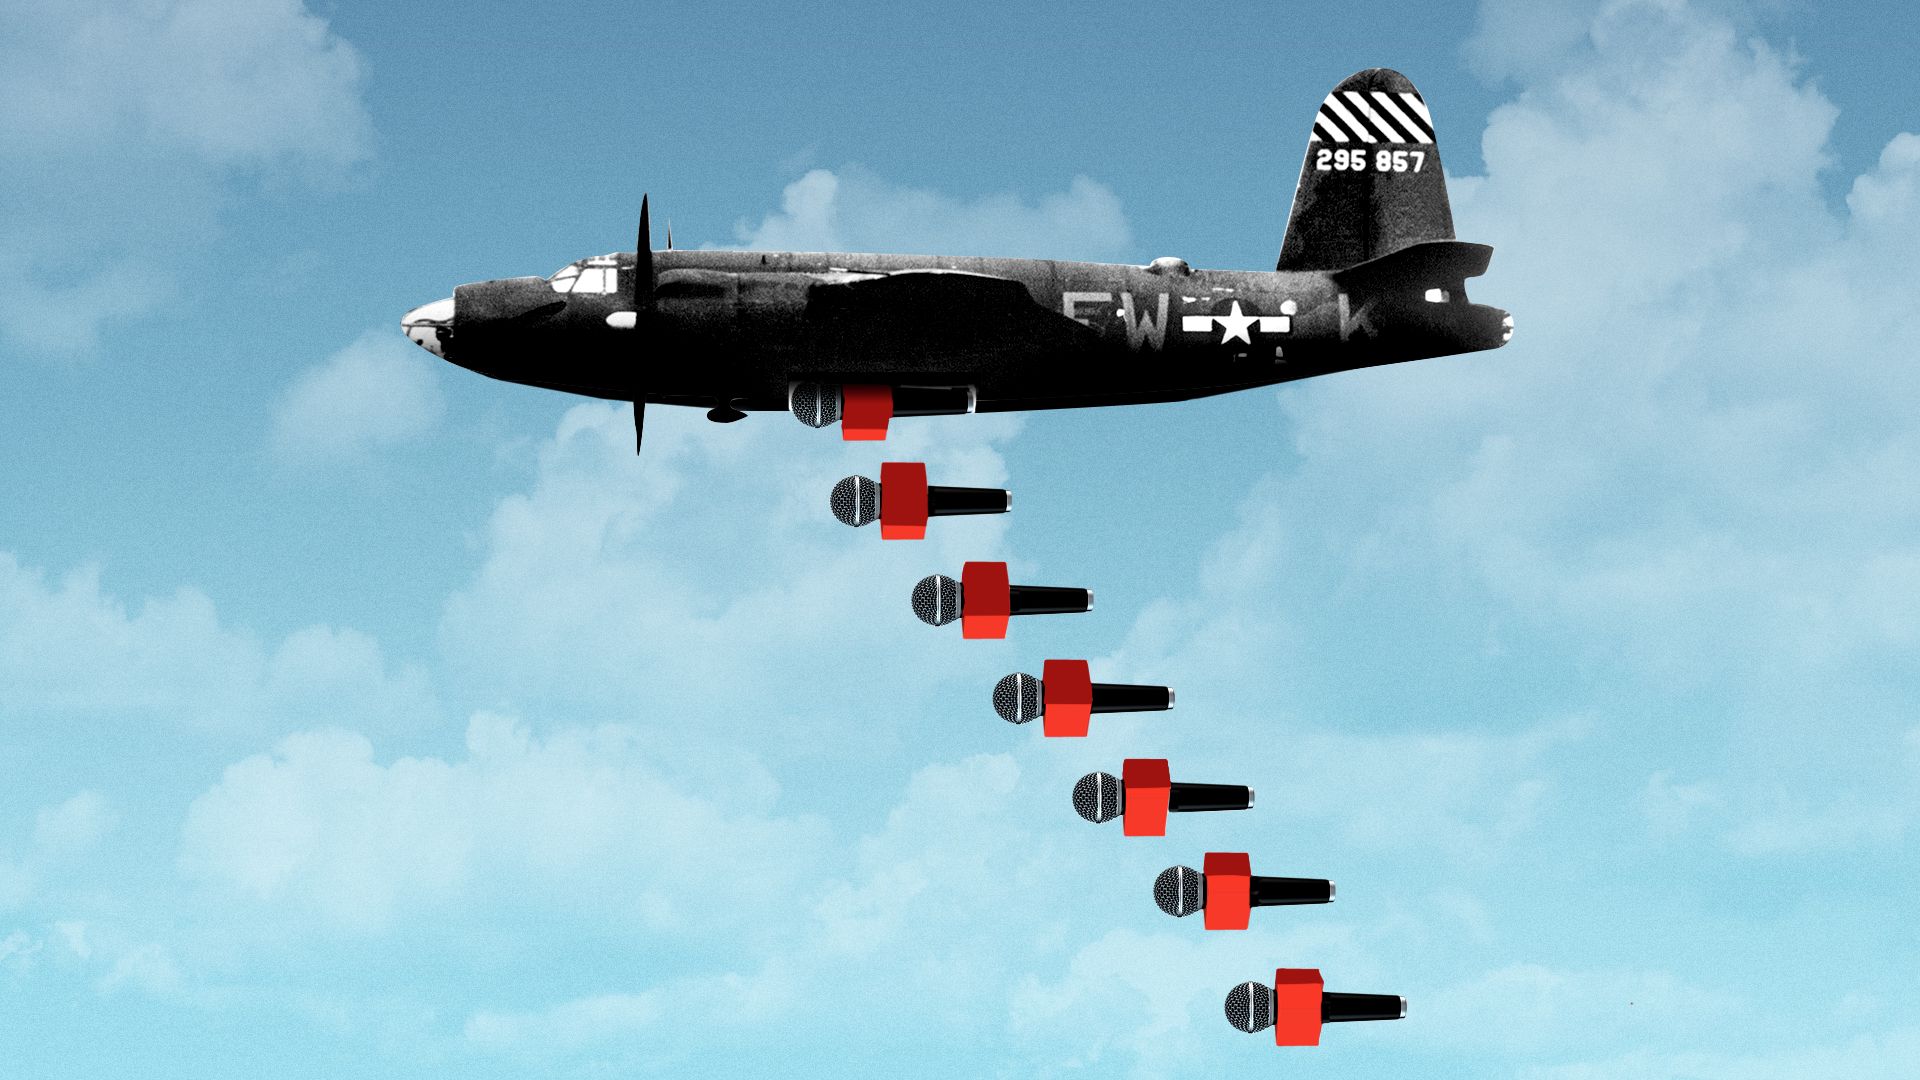 Illustration of a bomber plane with TV microphones falling out of the bomb hatch